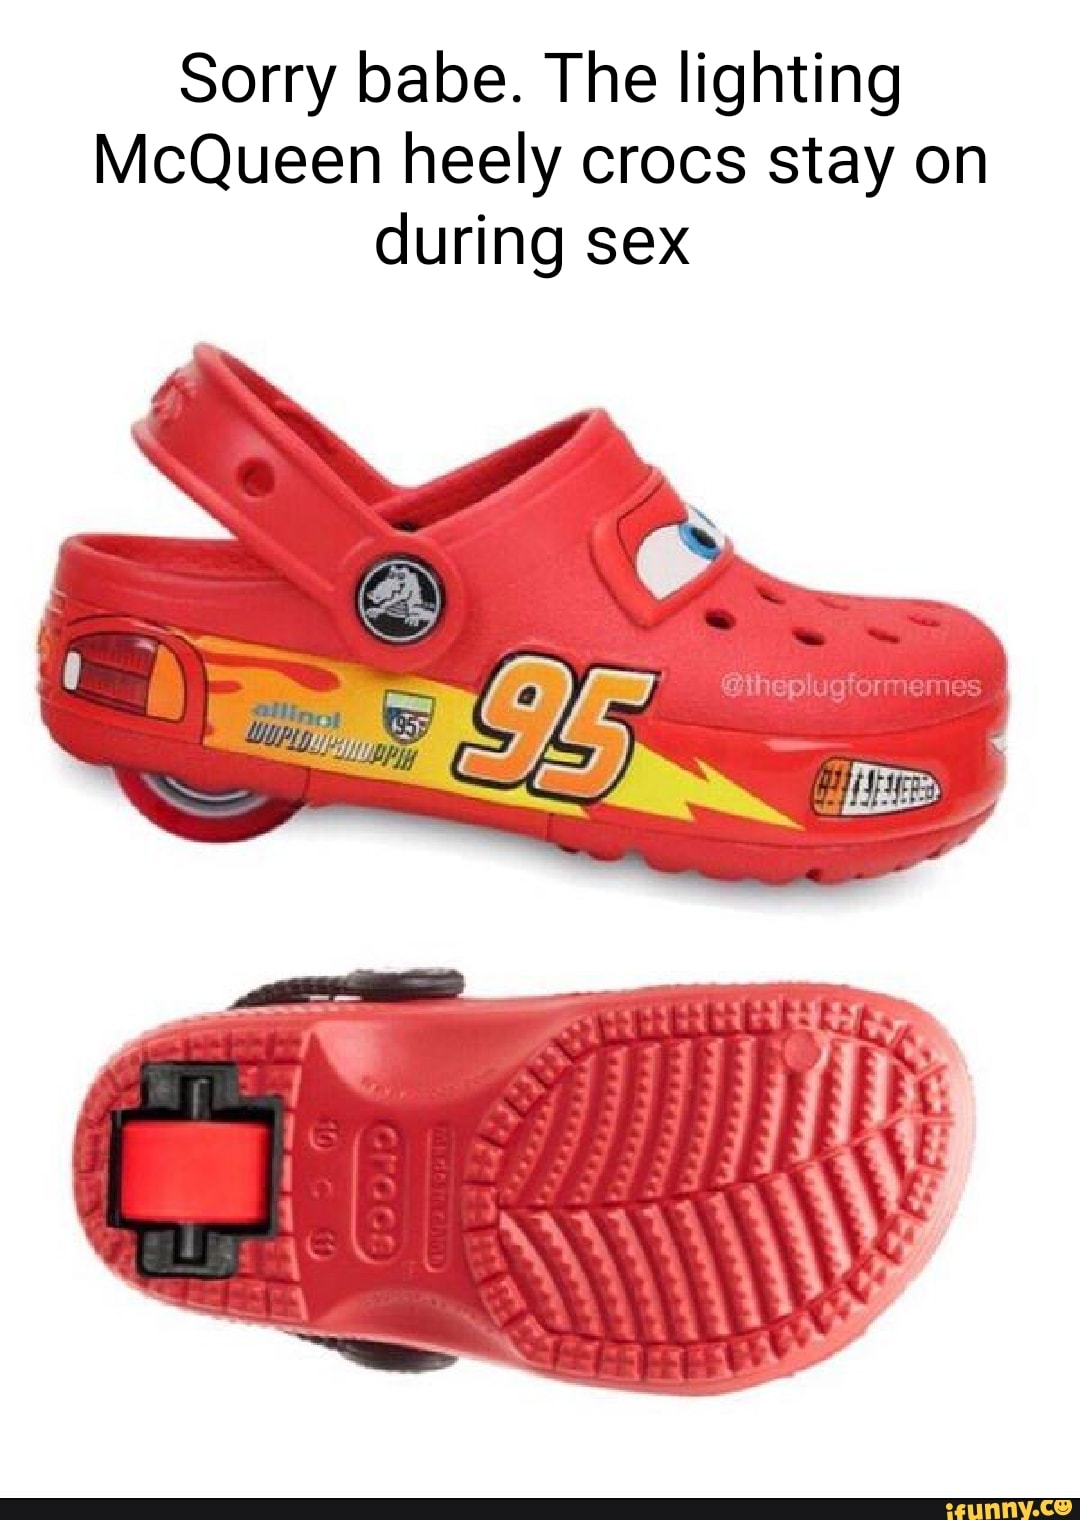 Sorry Babe The Lighting Mcqueen Heely Crocs Stay On During Sex Ifunny